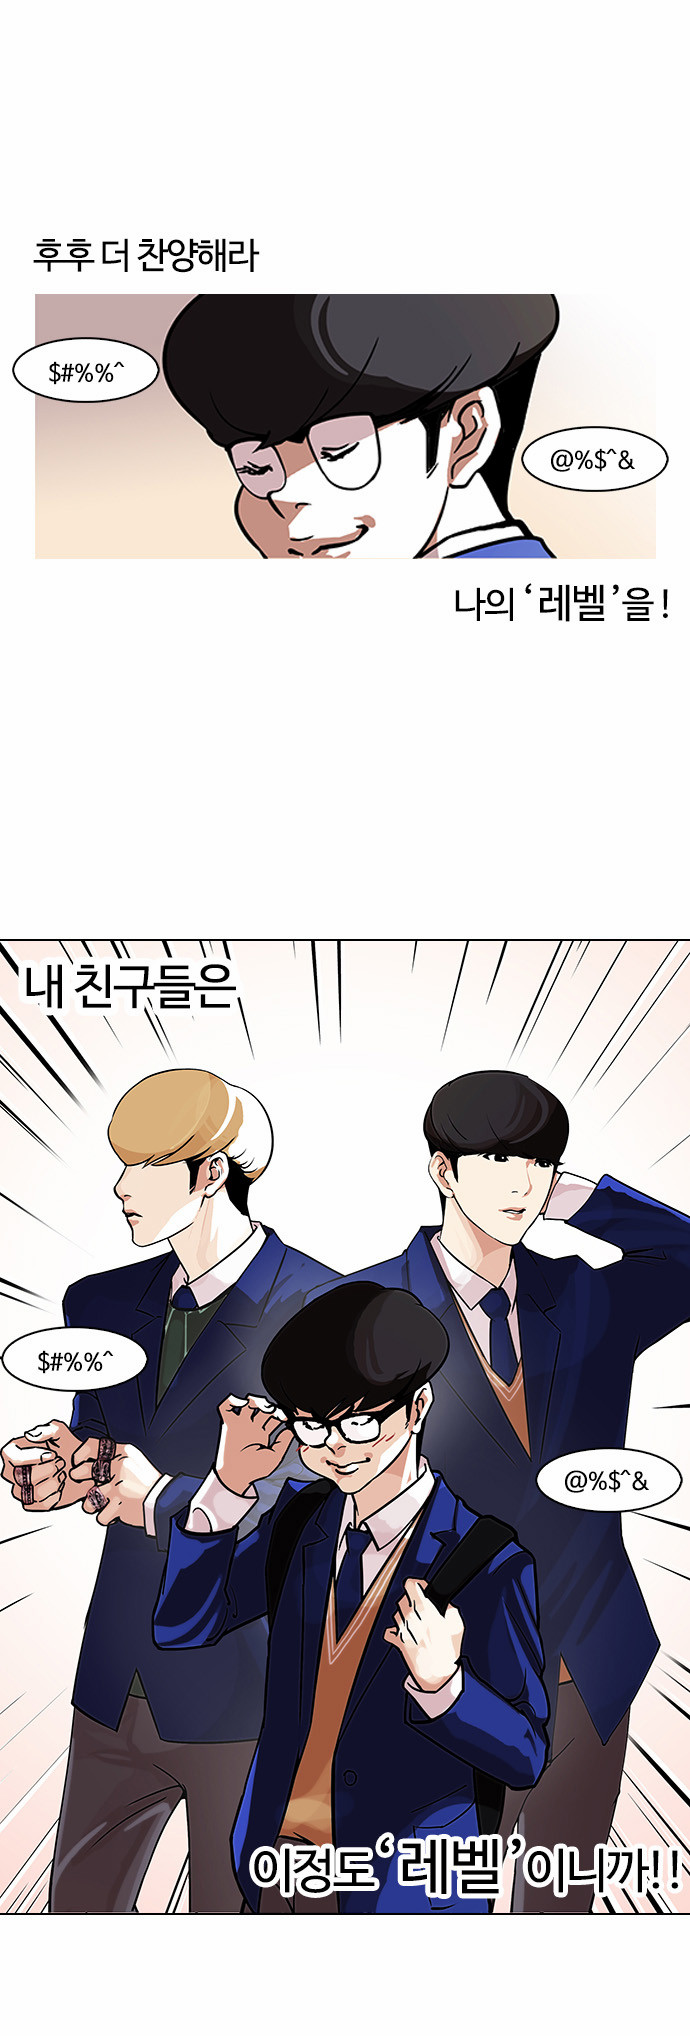 Lookism - Chapter 110 - Page 3